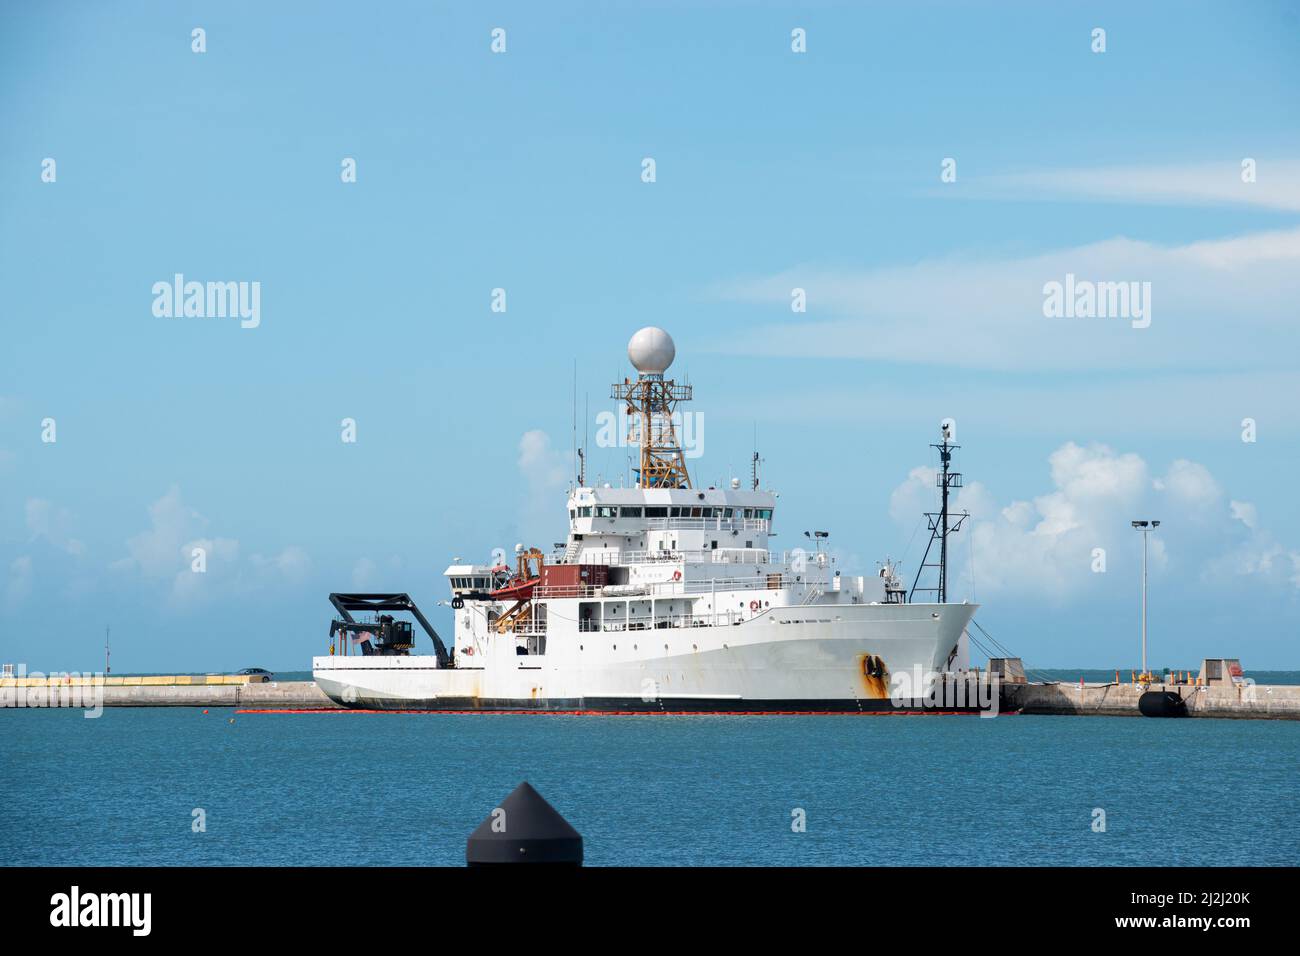 A global class research vessel with all logos removed Stock Photo